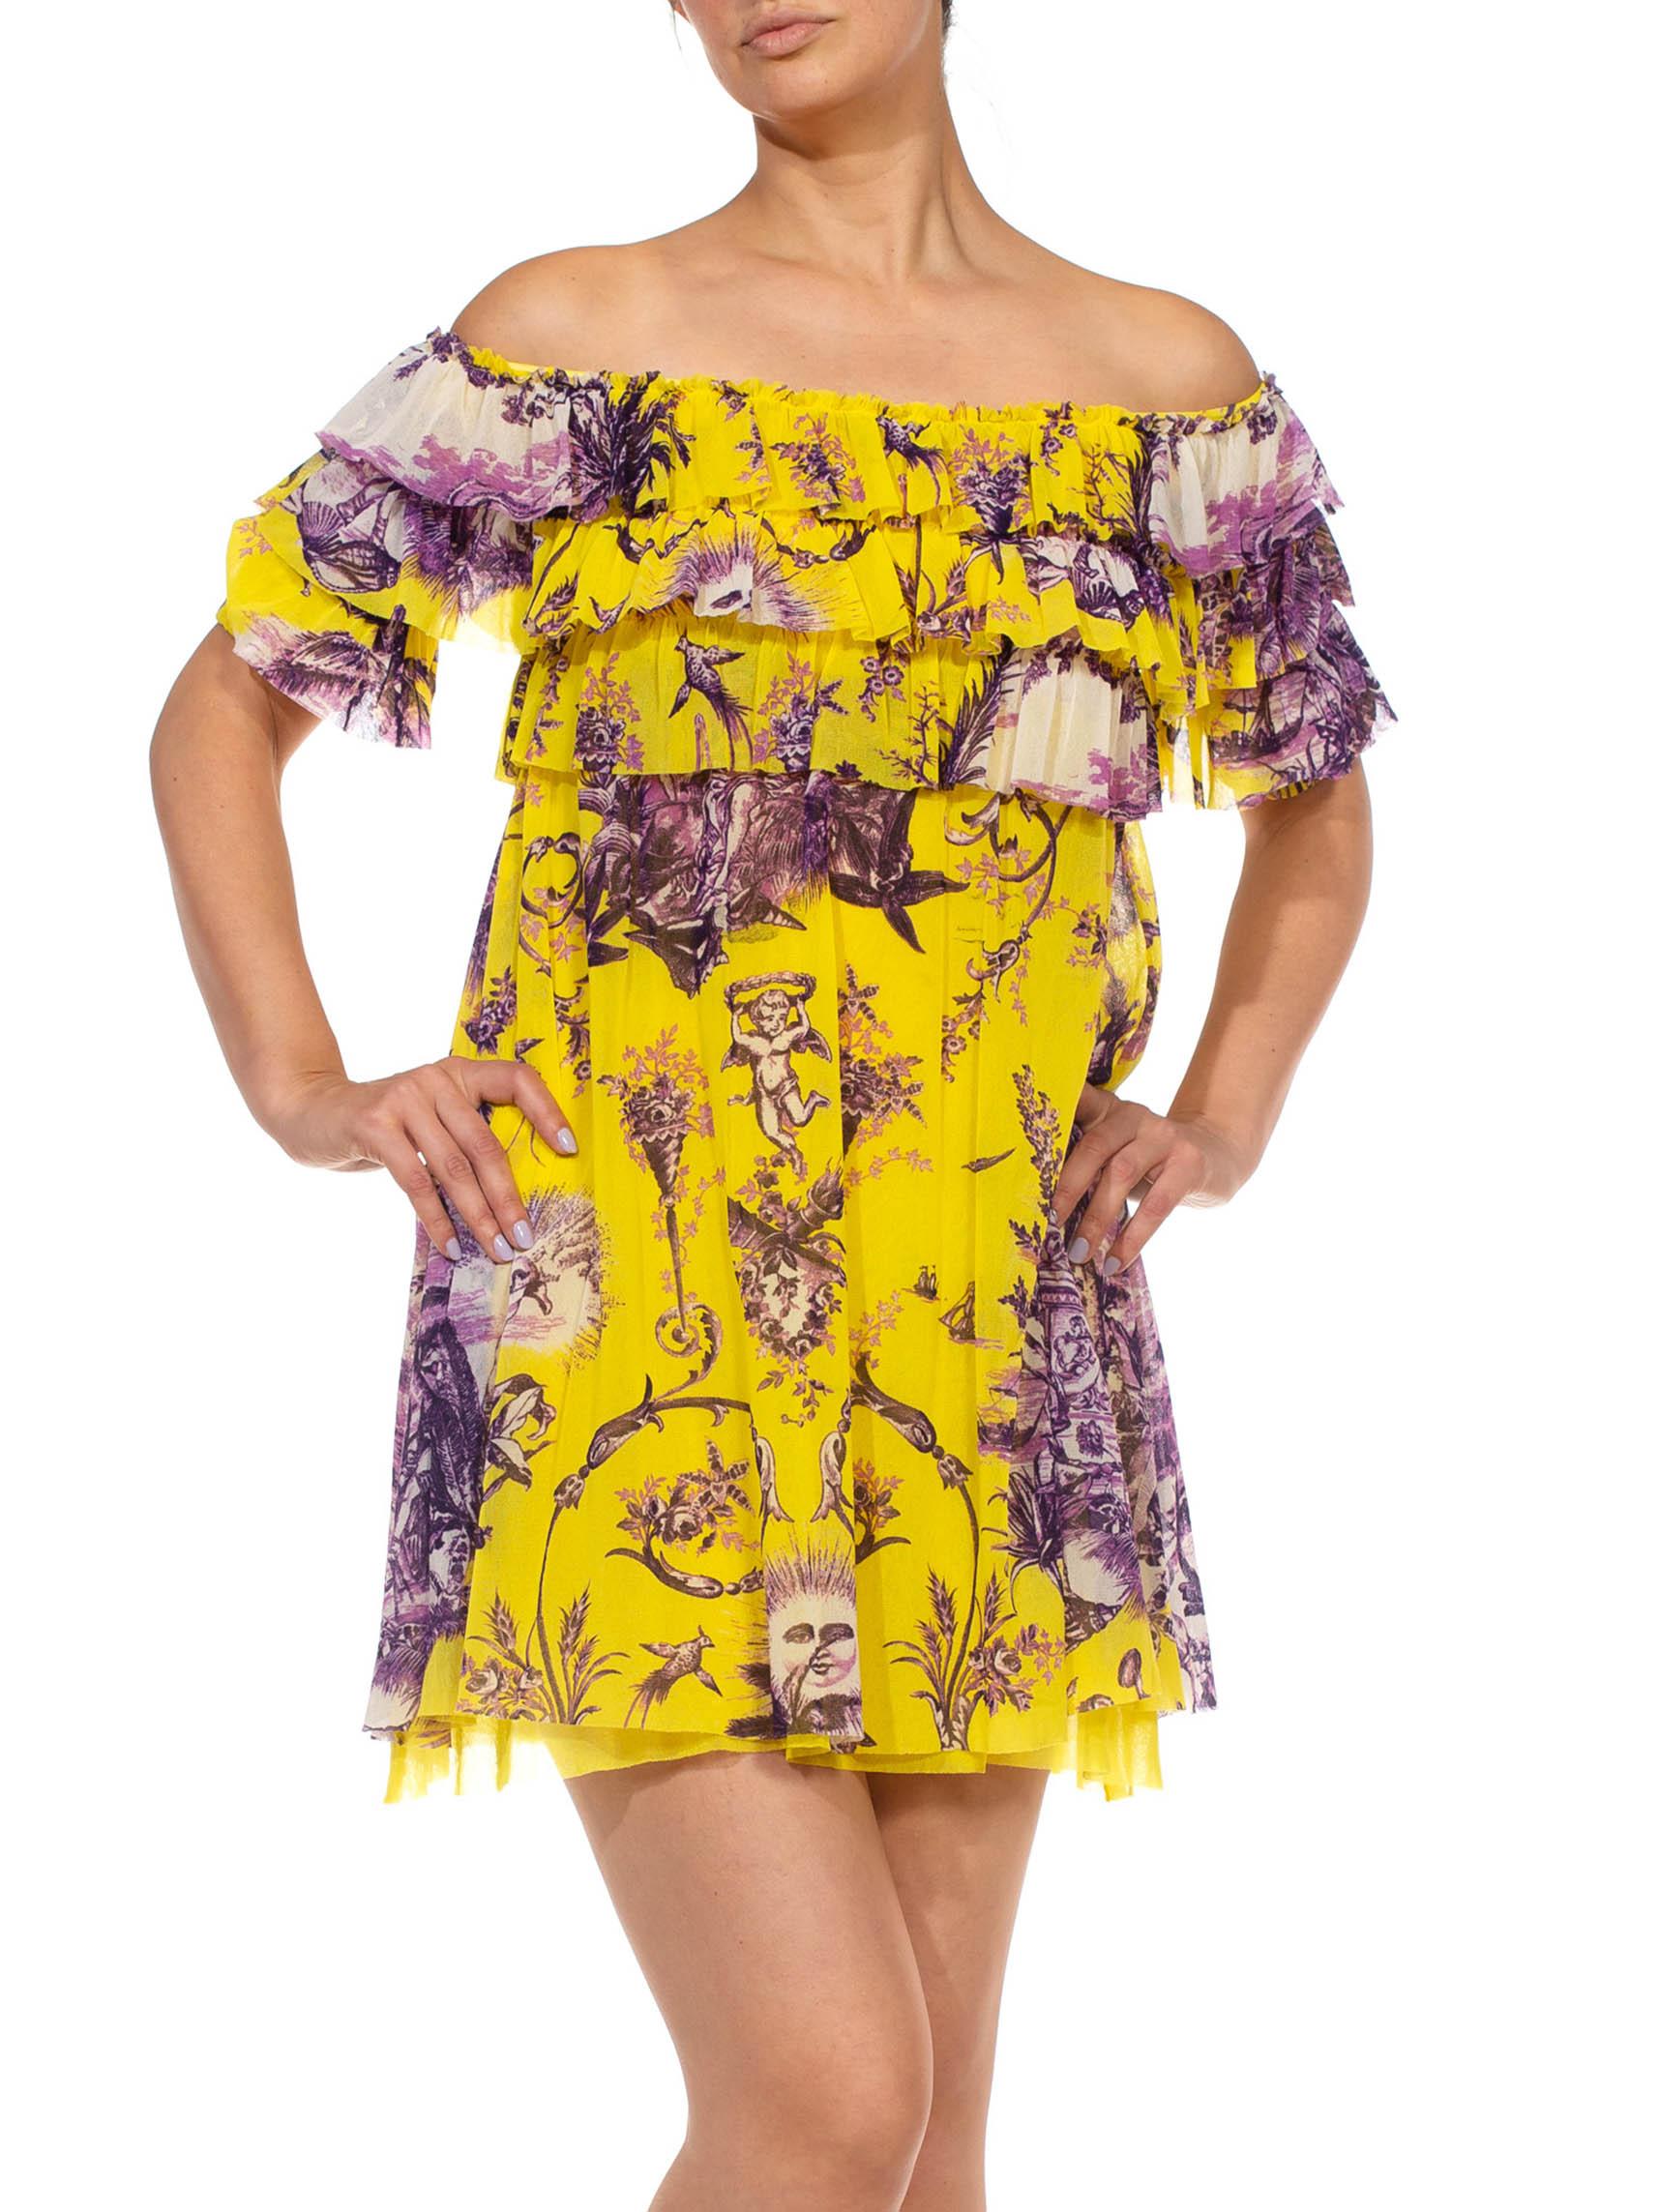 yellow and purple floral dress